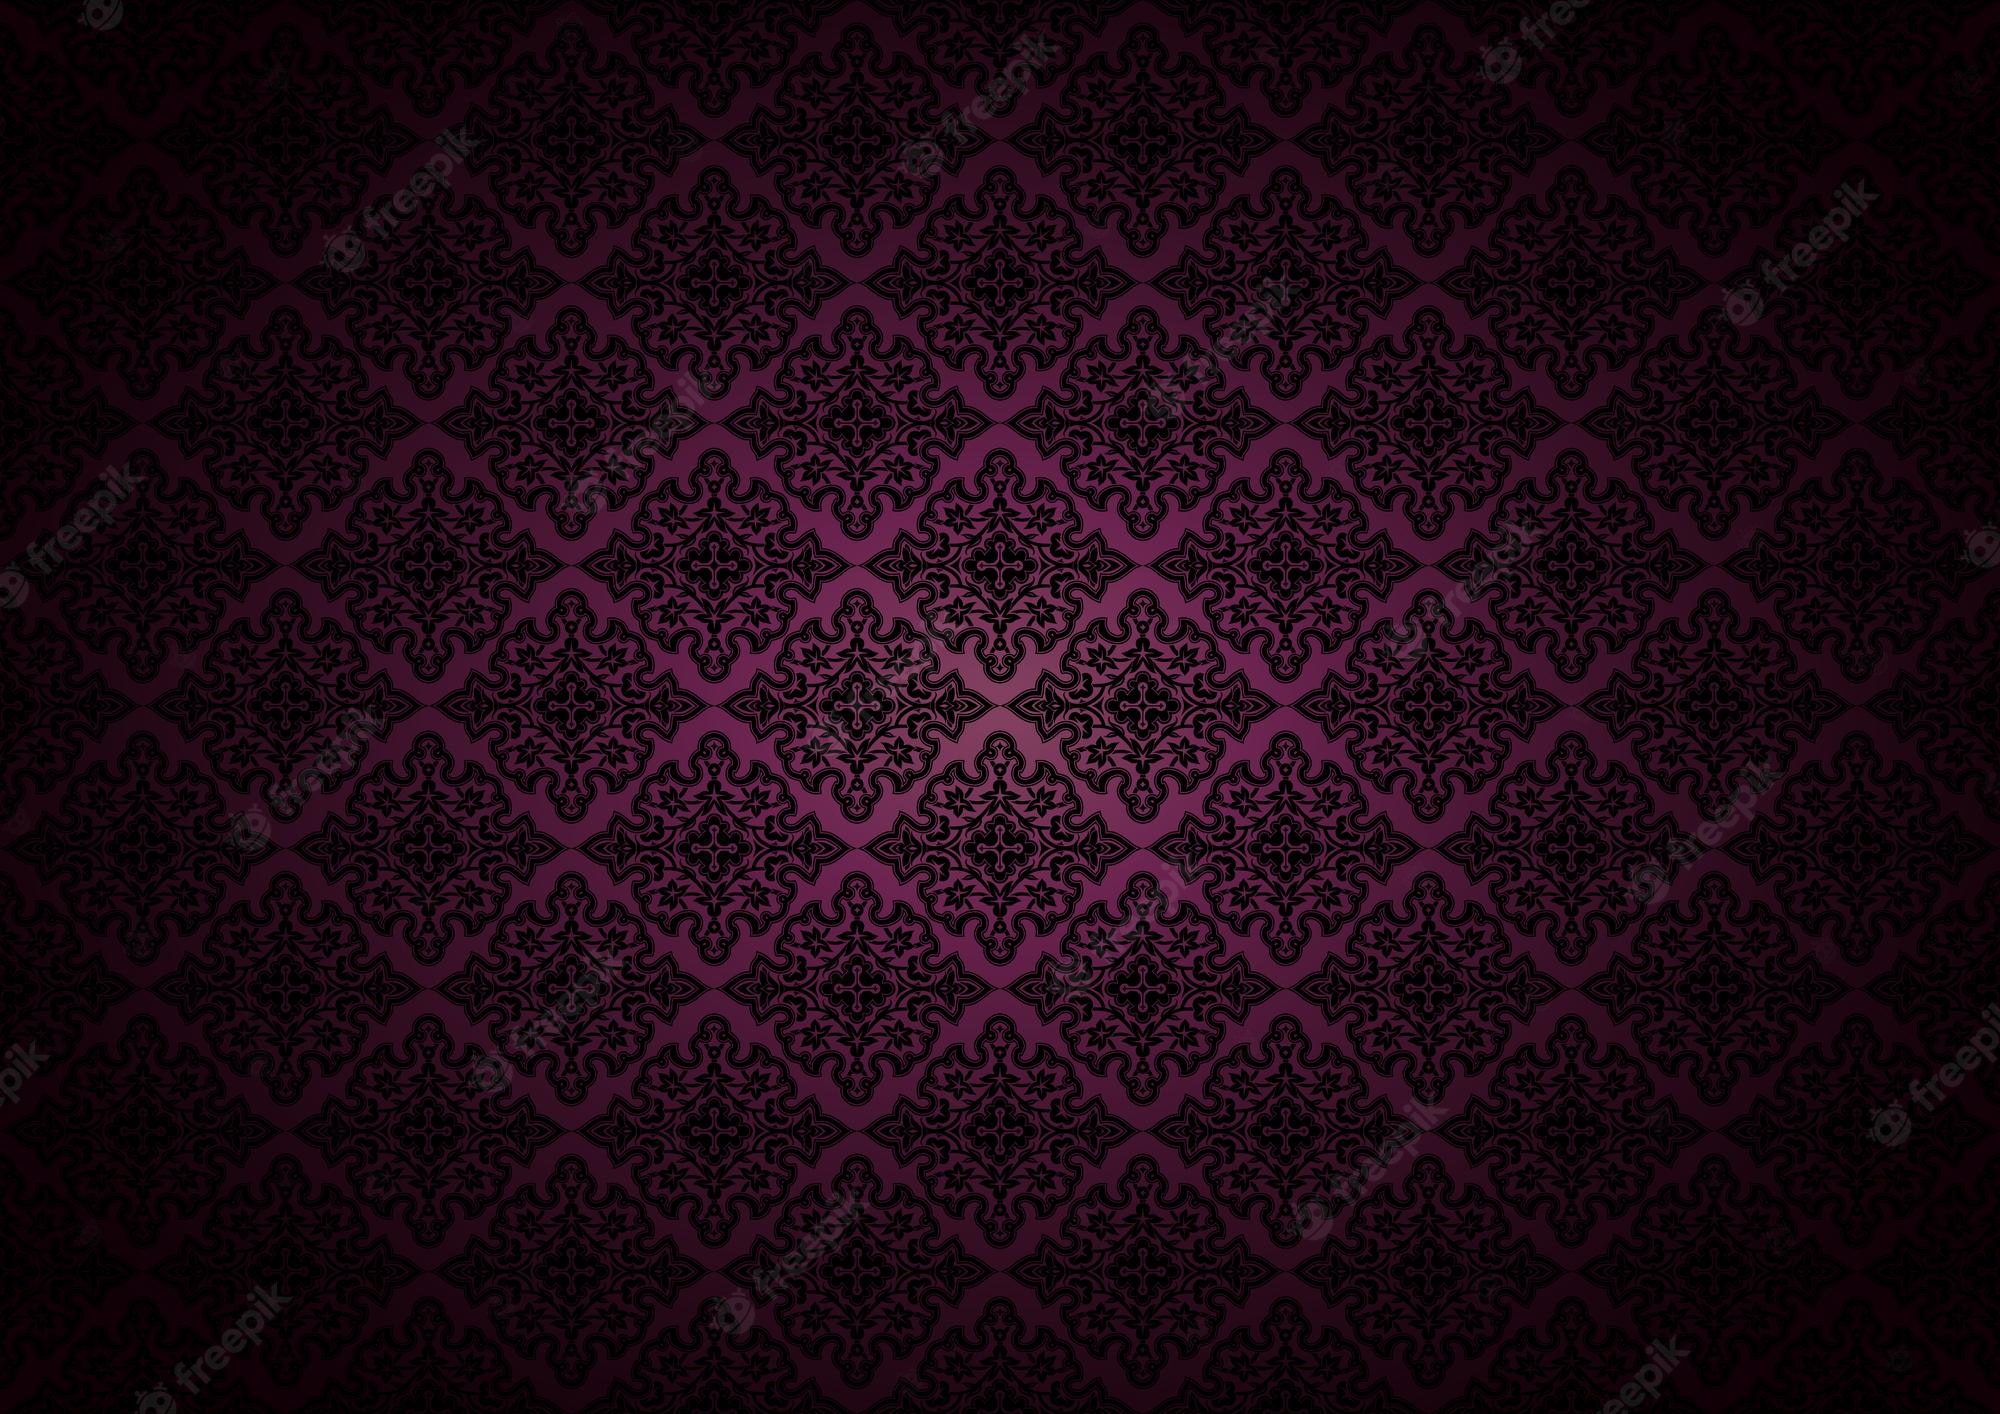 Purple Gothic Backgrounds